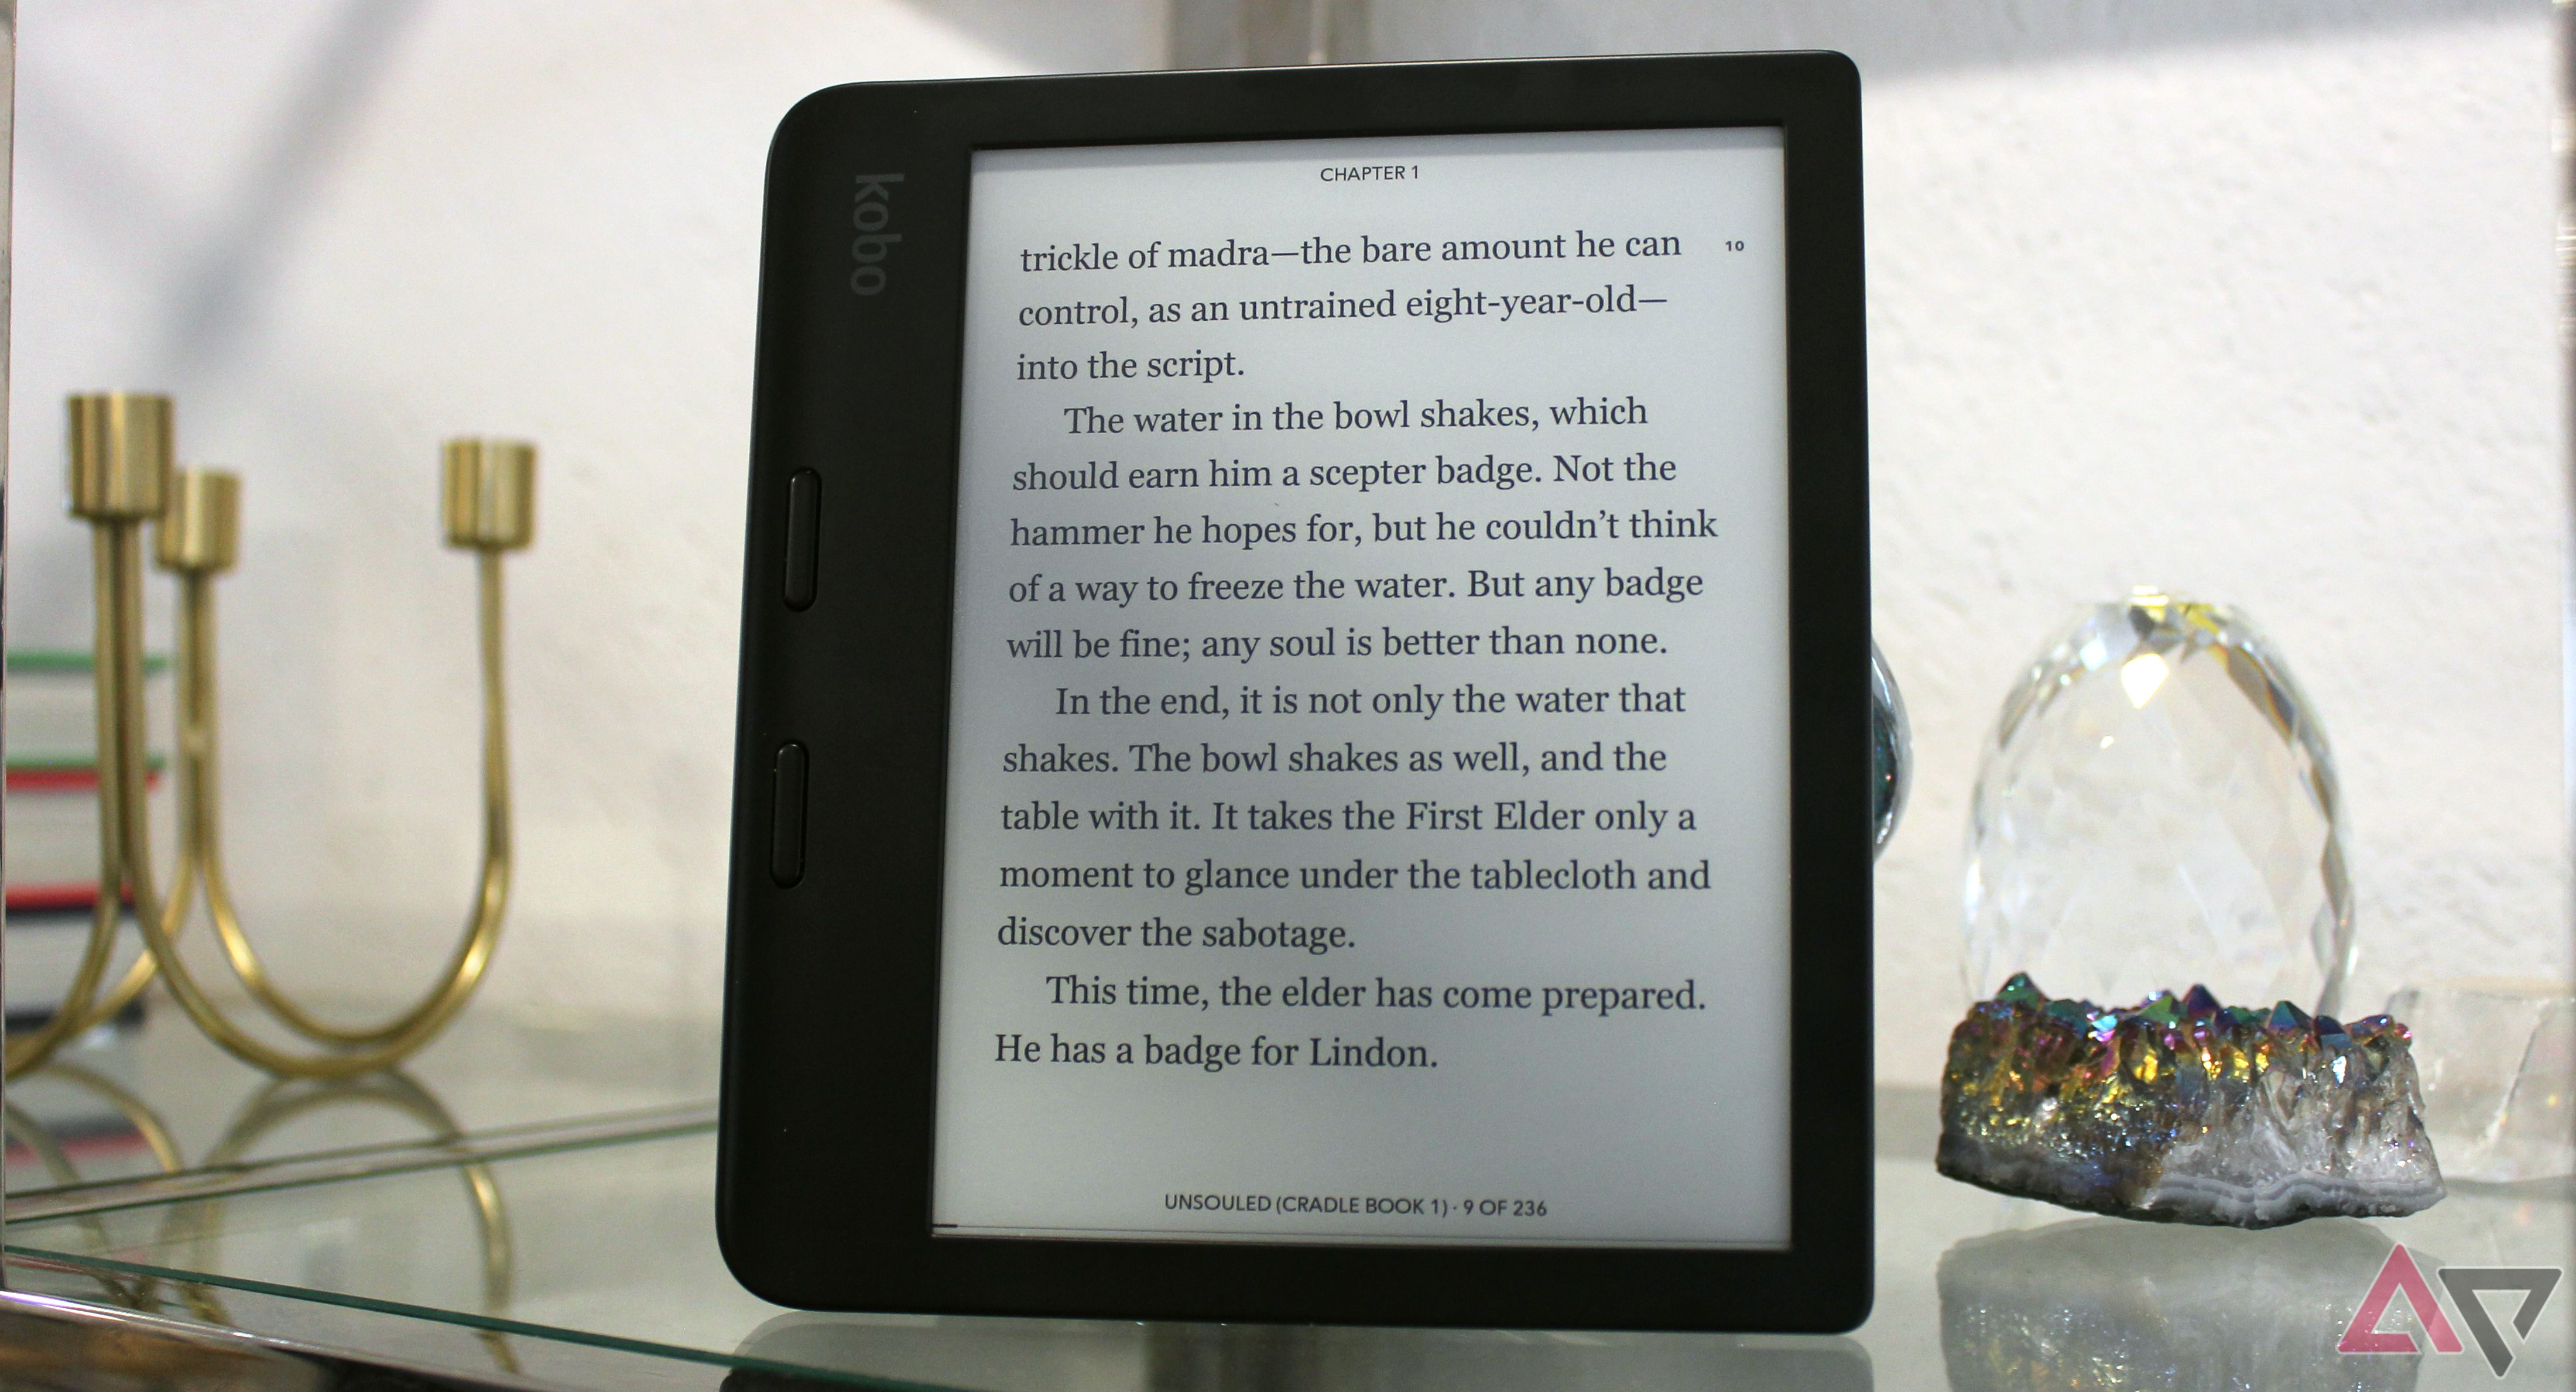 Kobo Libra 2 in light and shadow